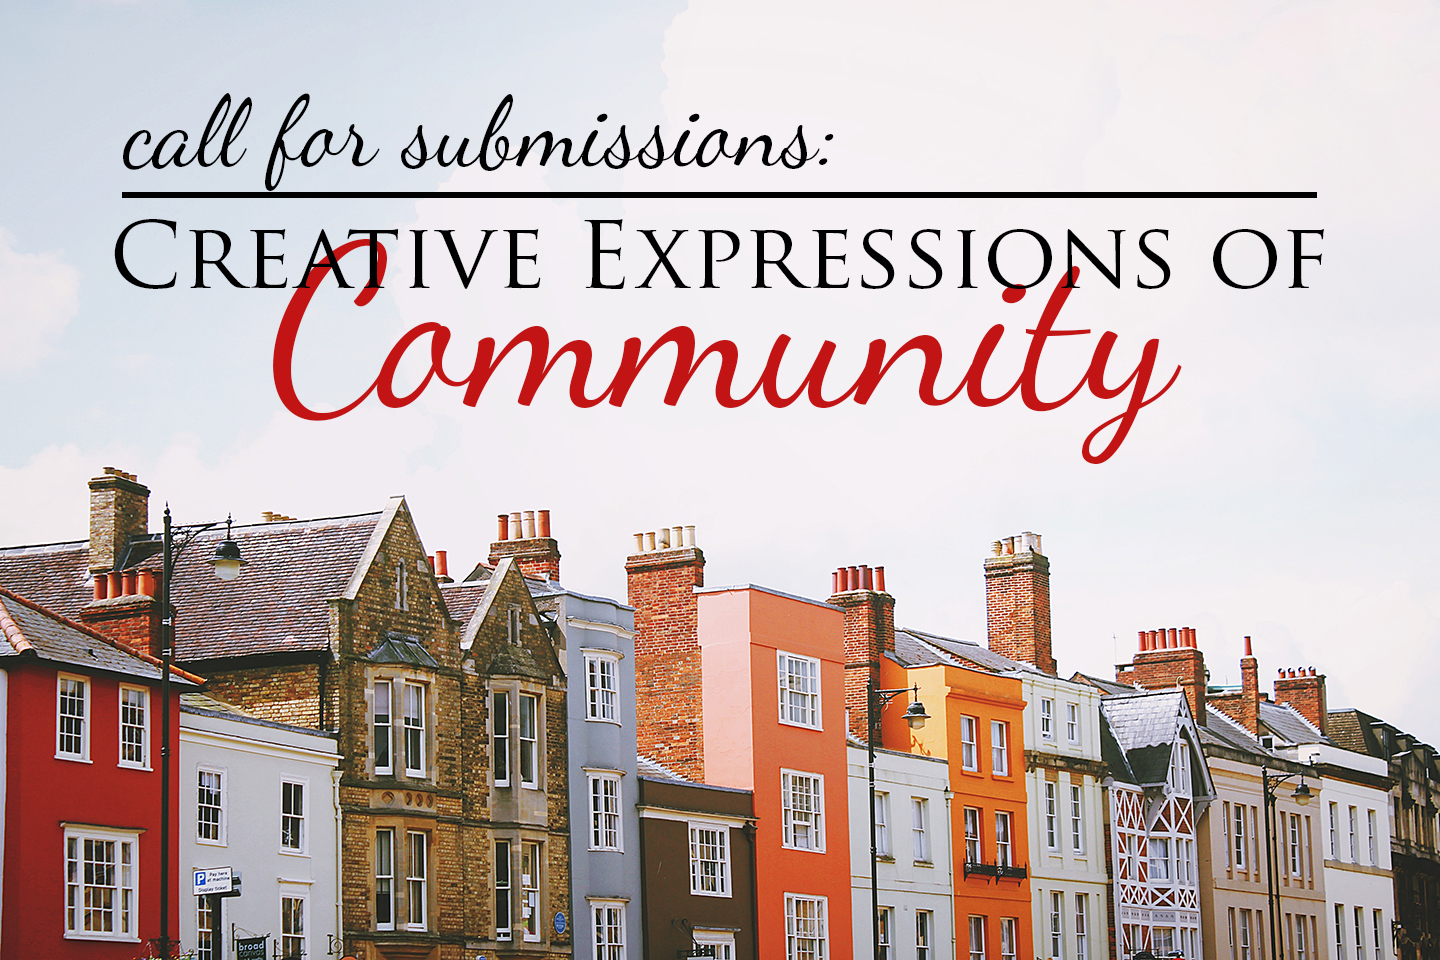 Call for submissions: creative expressions of community